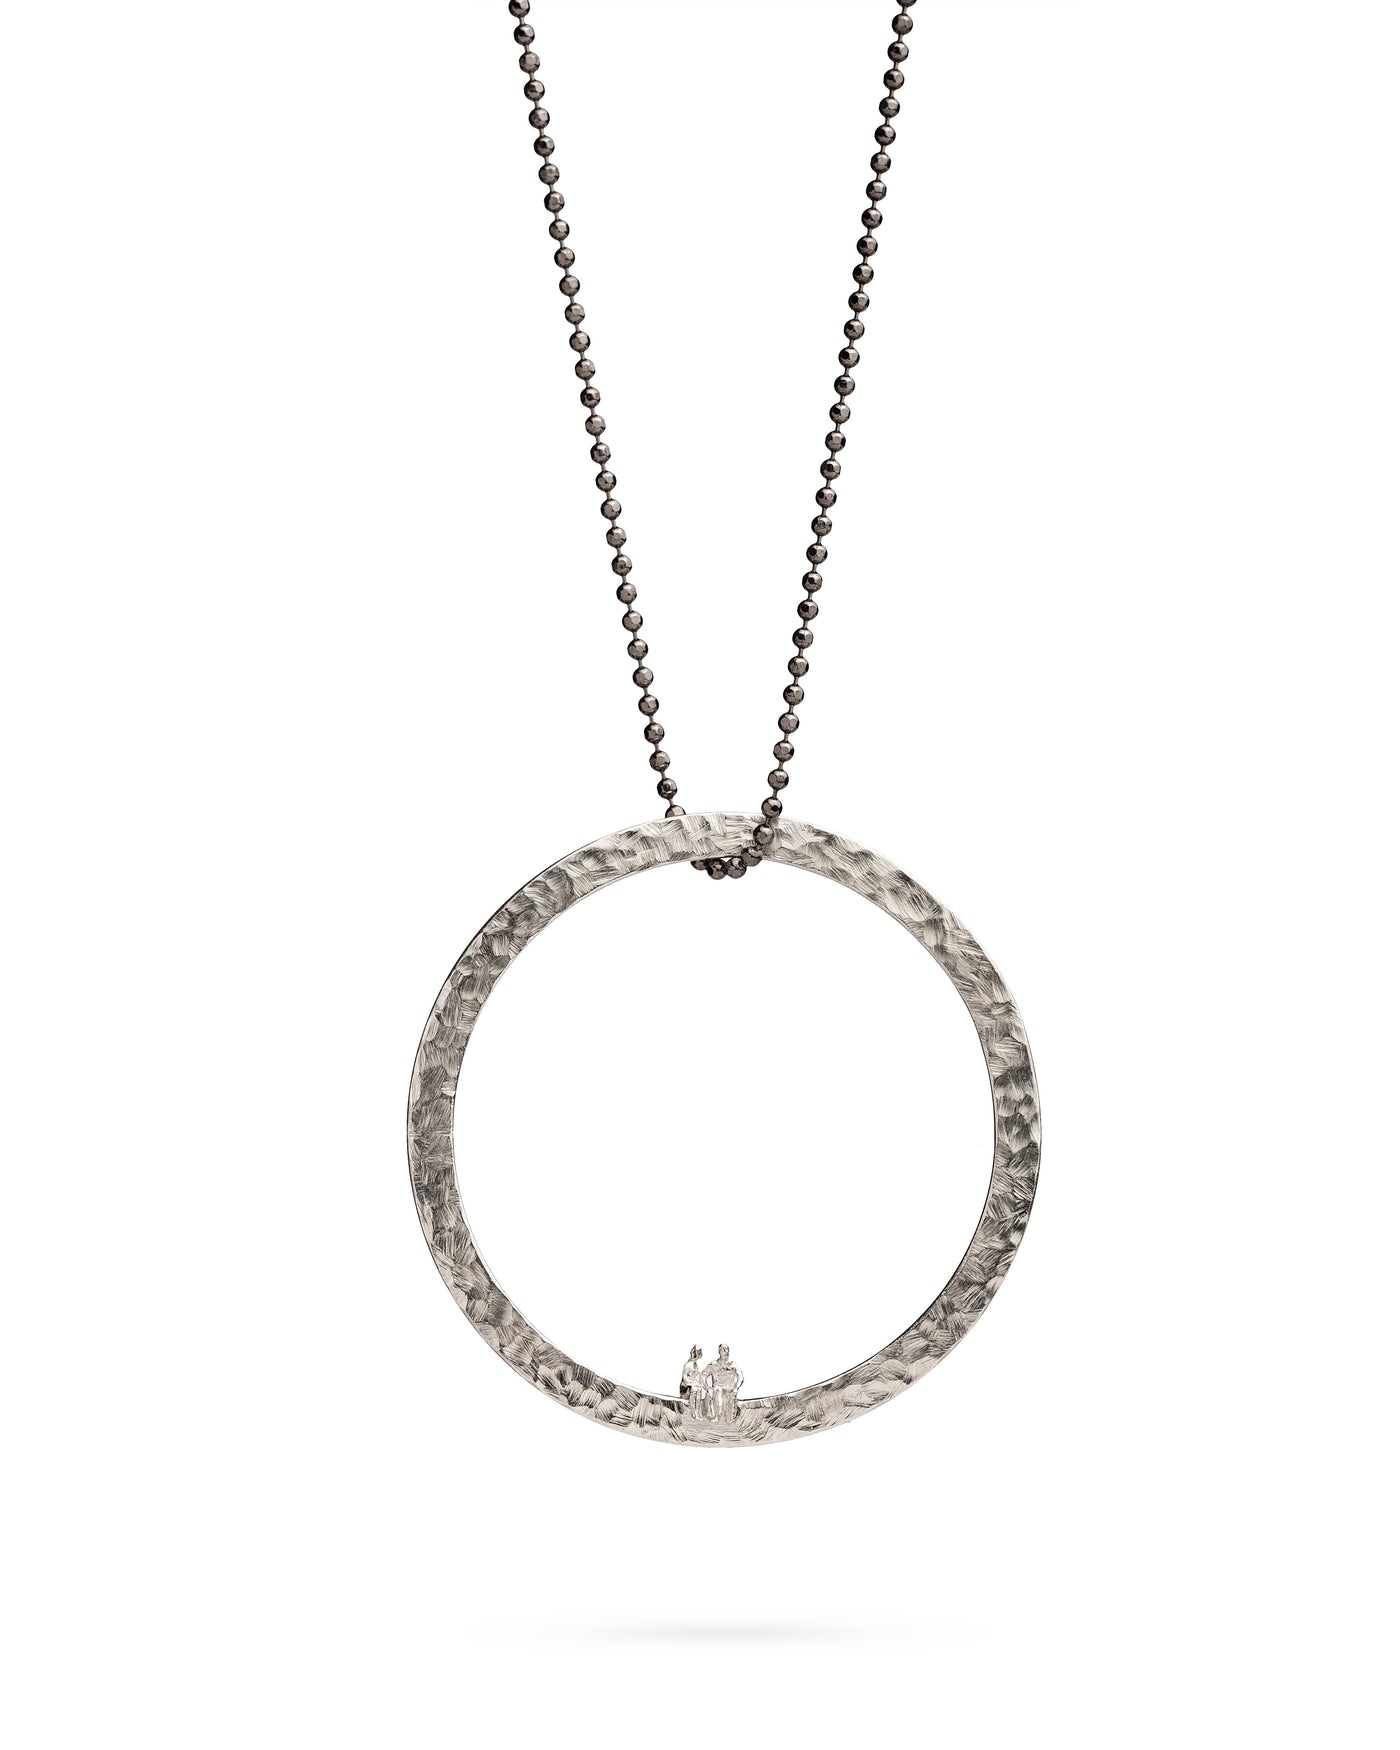 Silver necklace "TOGETHER ON THE ROAD"